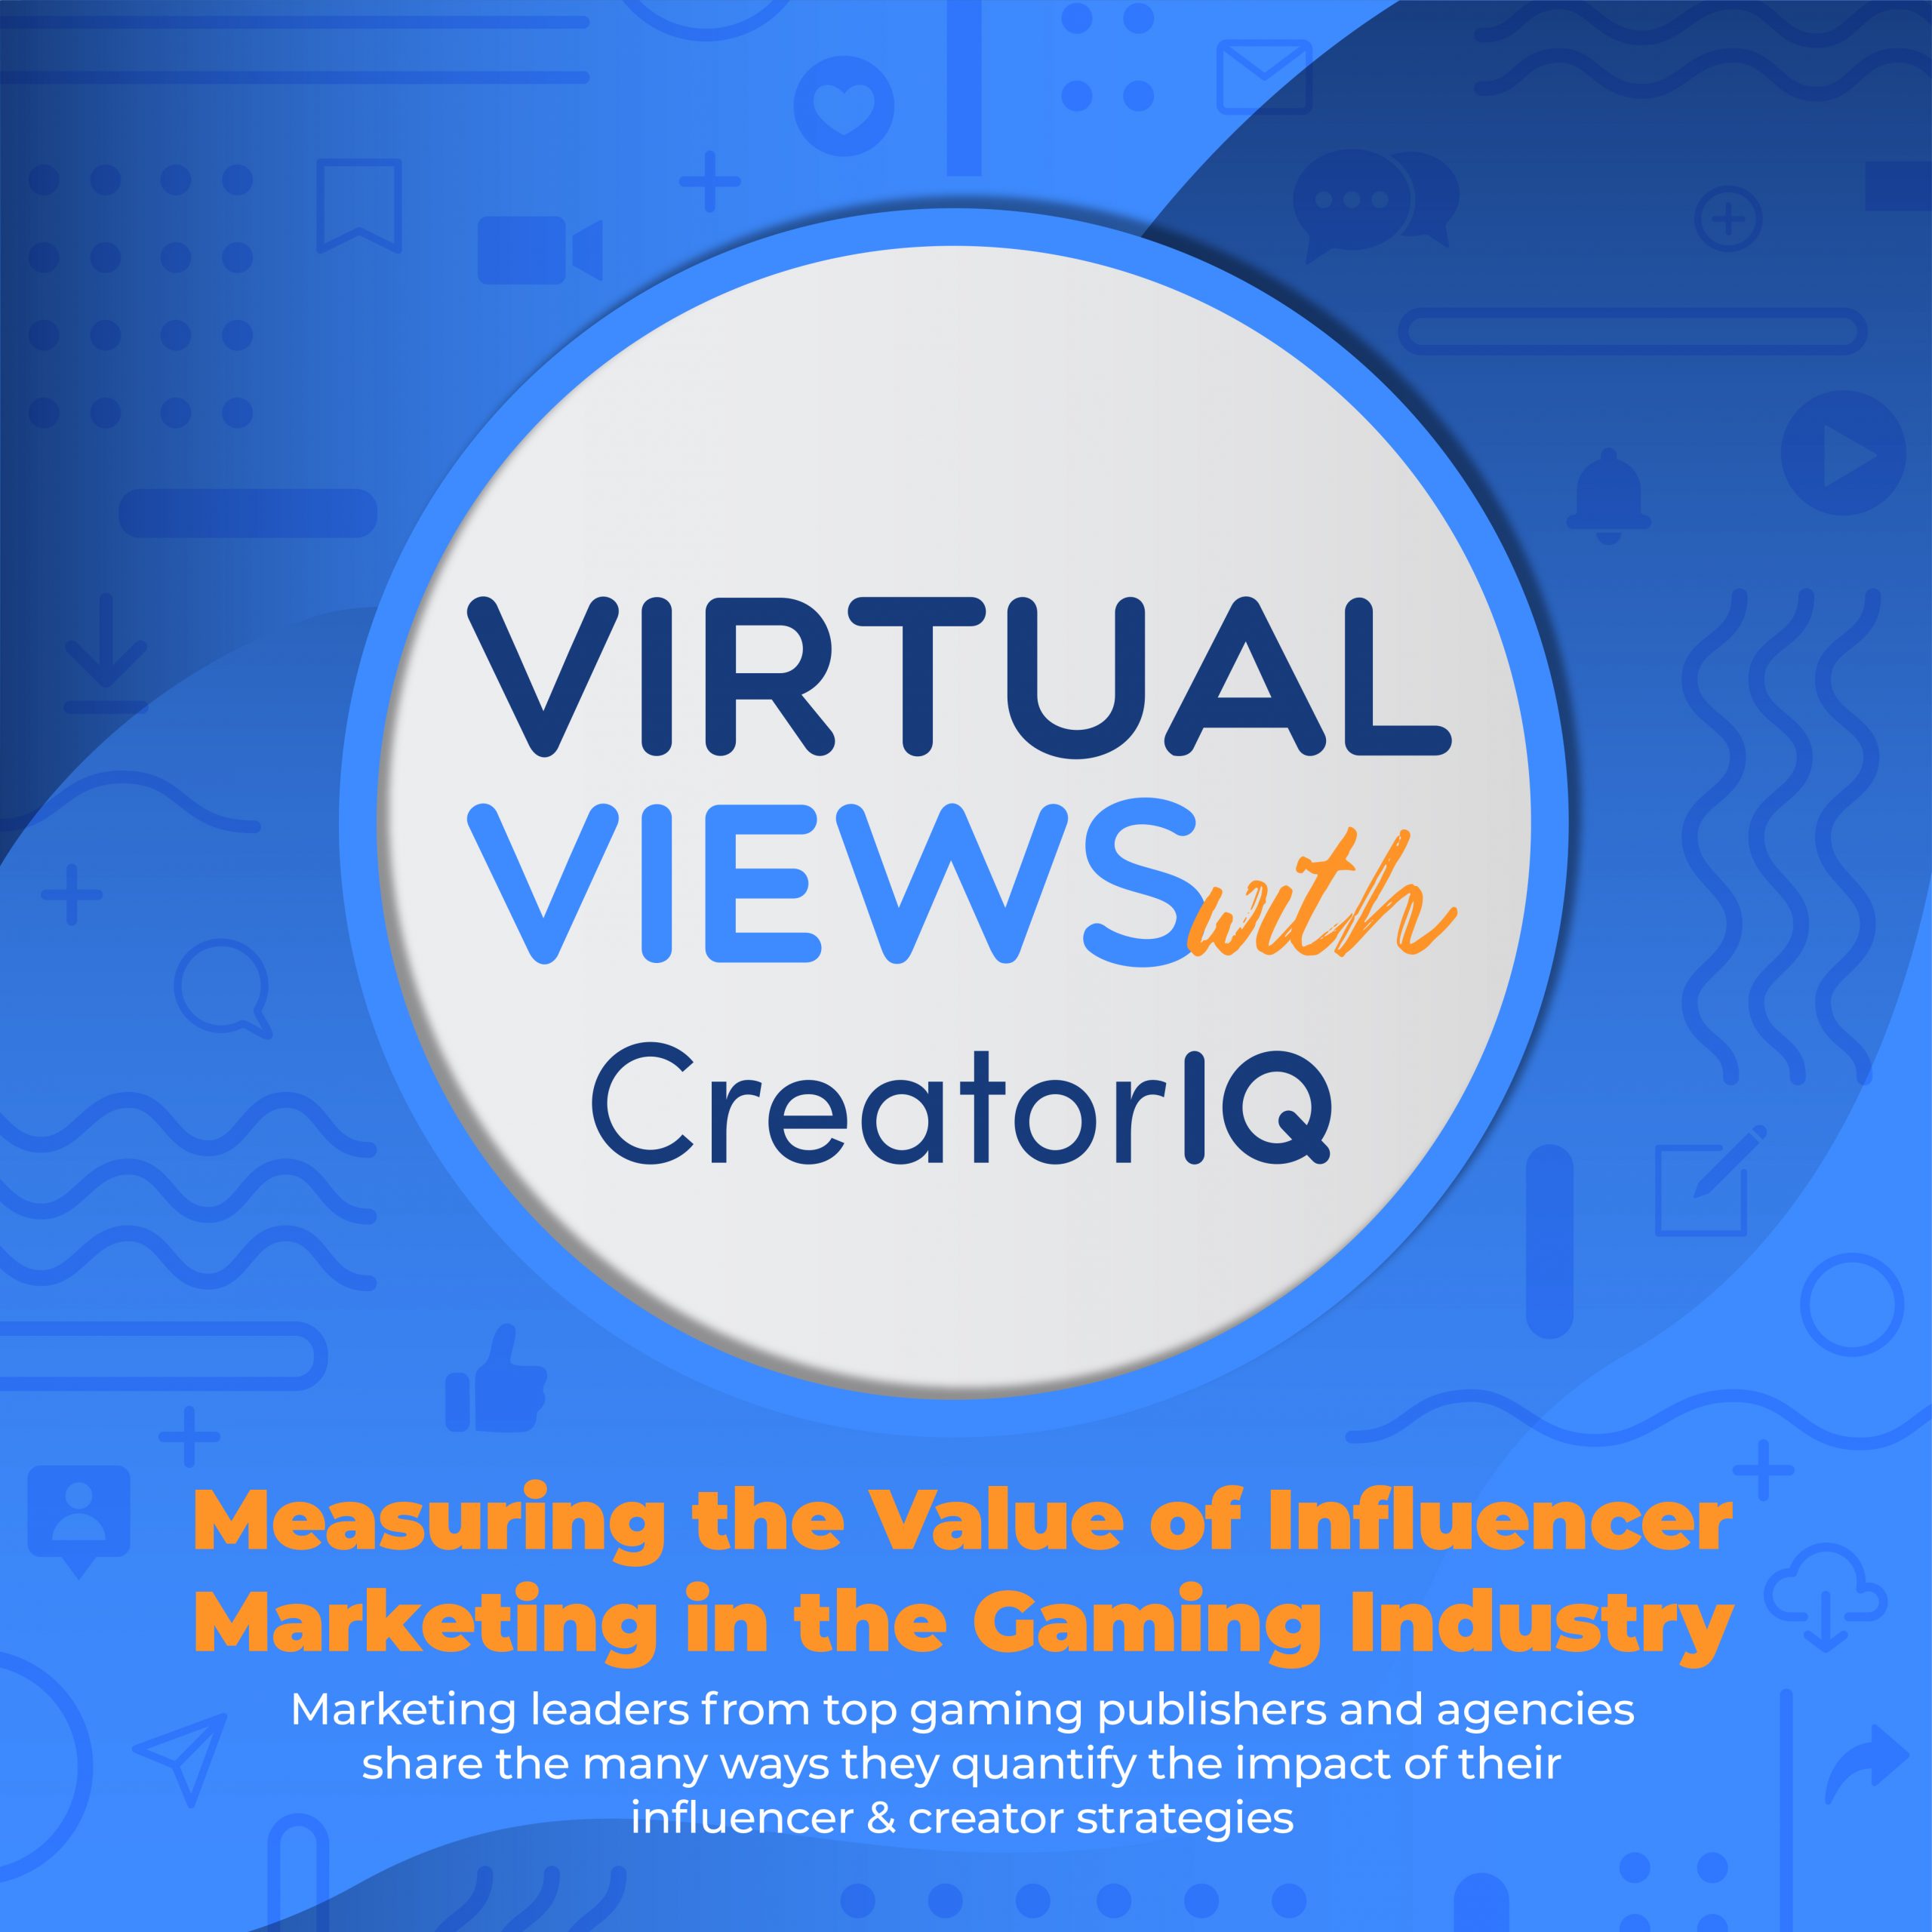 Virtual Views with CreatorIQ: Measuring the Value of Influencer Marketing in the Gaming Industry